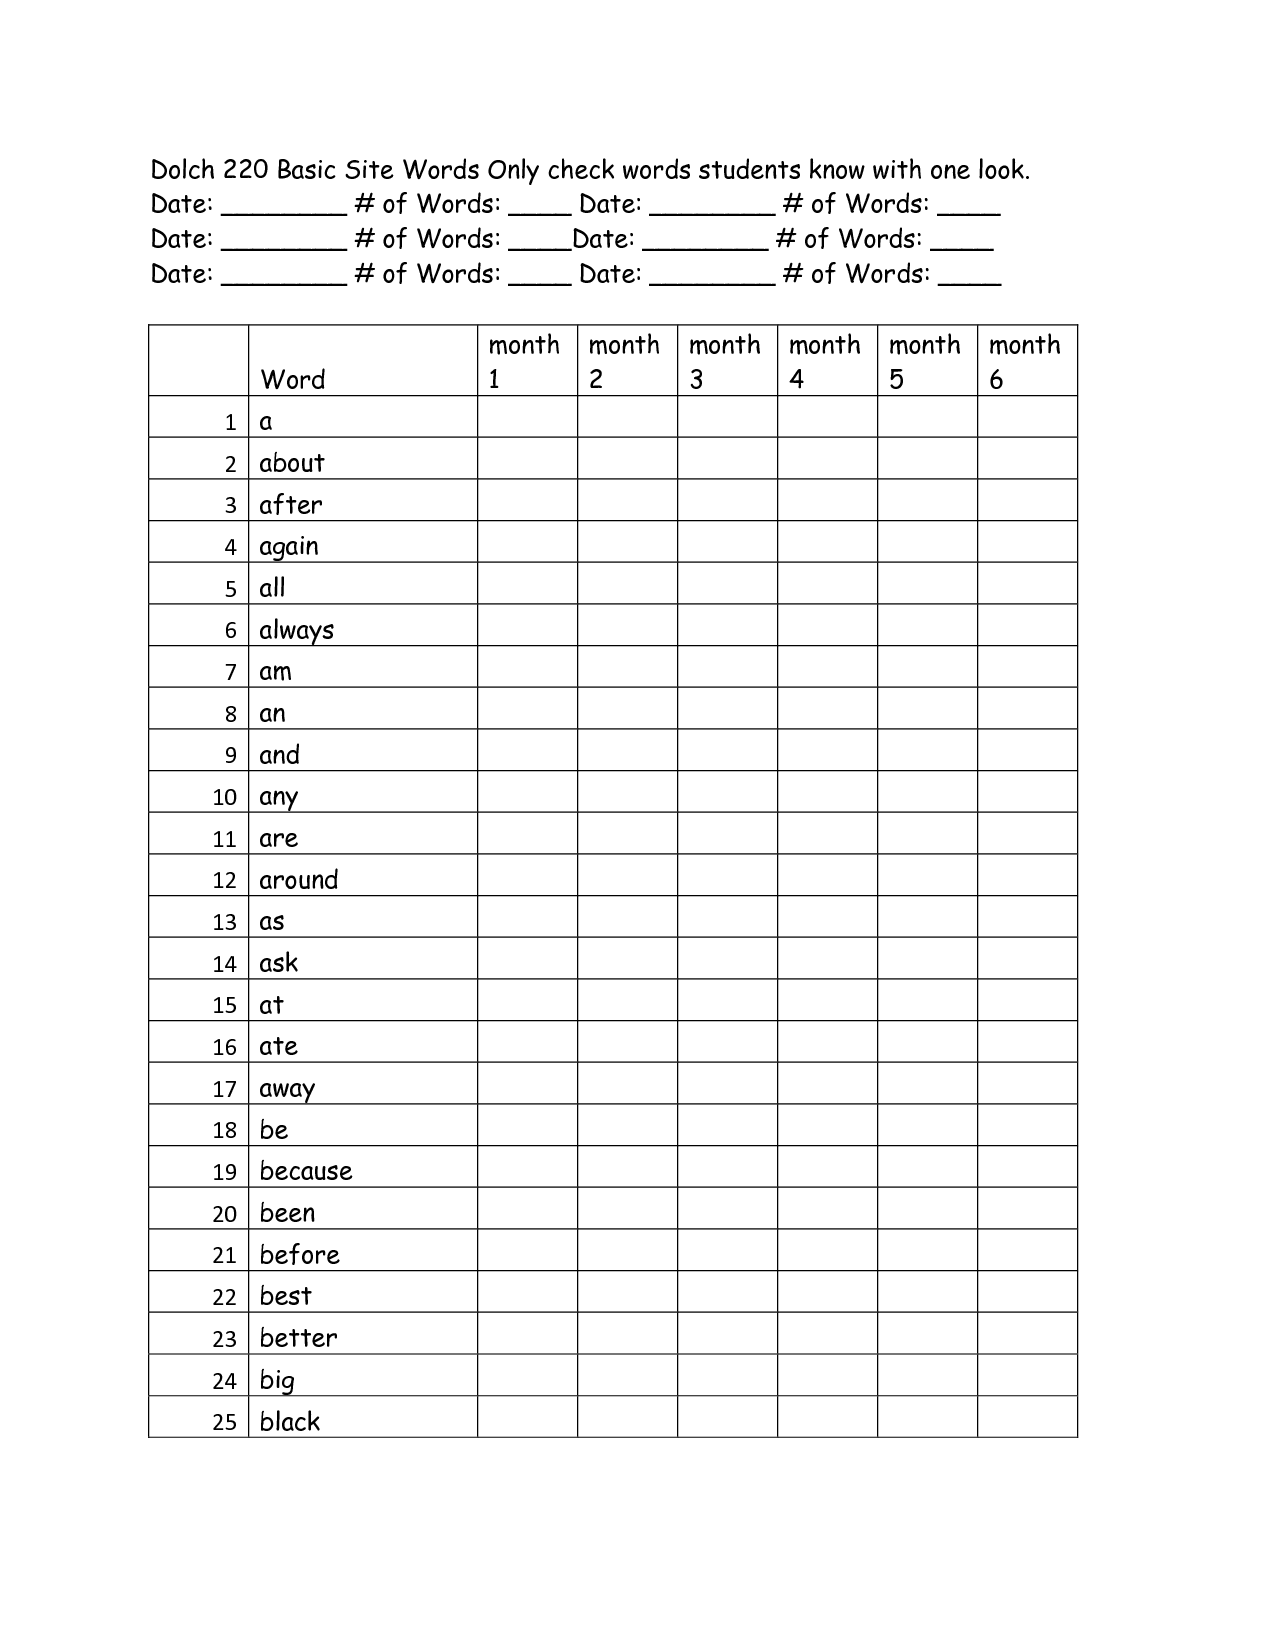 Dolch Sight Word Assessment Checklist Image